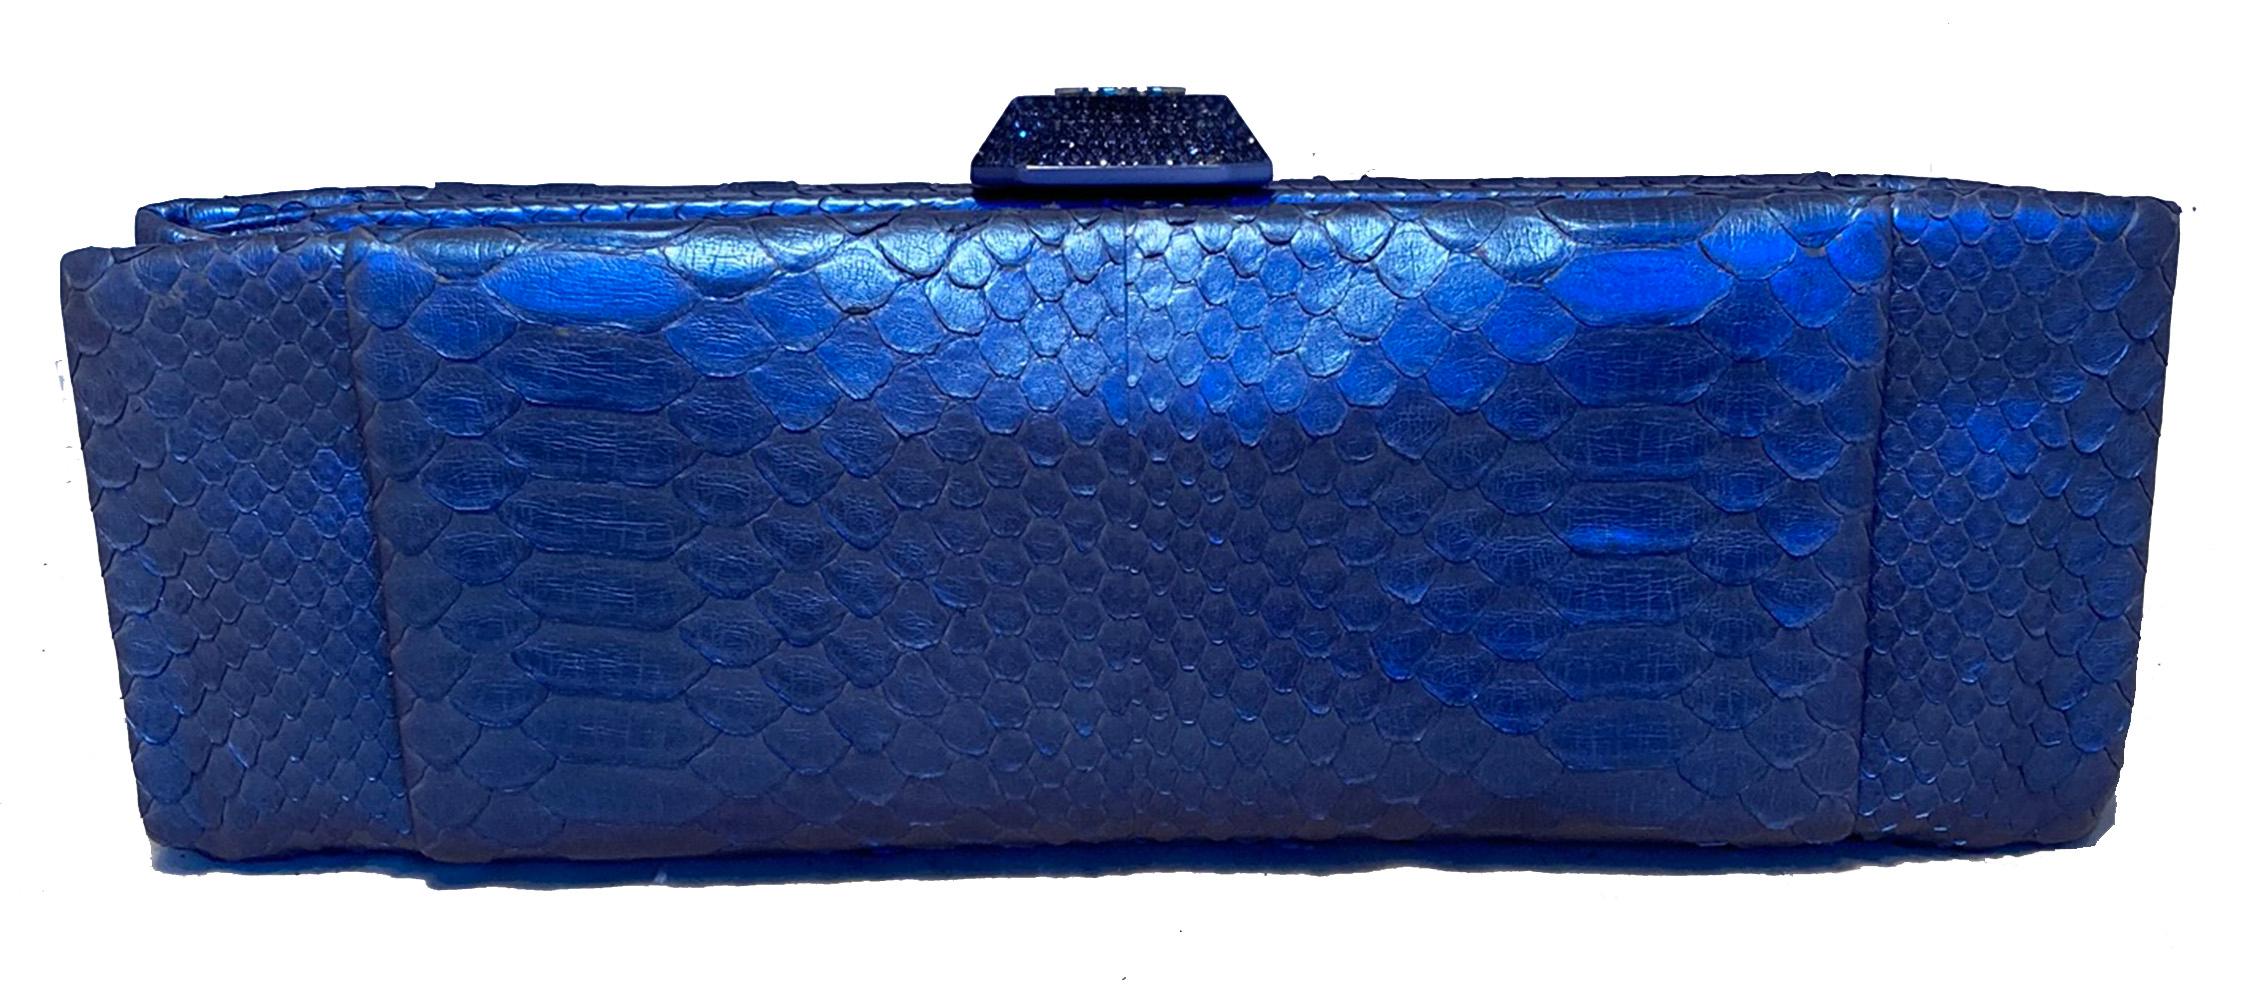 Chanel Blue Metallic Snakeskin Clutch in excellent condition. Iridescent metallic blue python snakeskin exterior trimmed with a jewel encased clear resin clasp. Two exterior side slit pockets. Lift latch top hinge closure opens to a blue silk lined